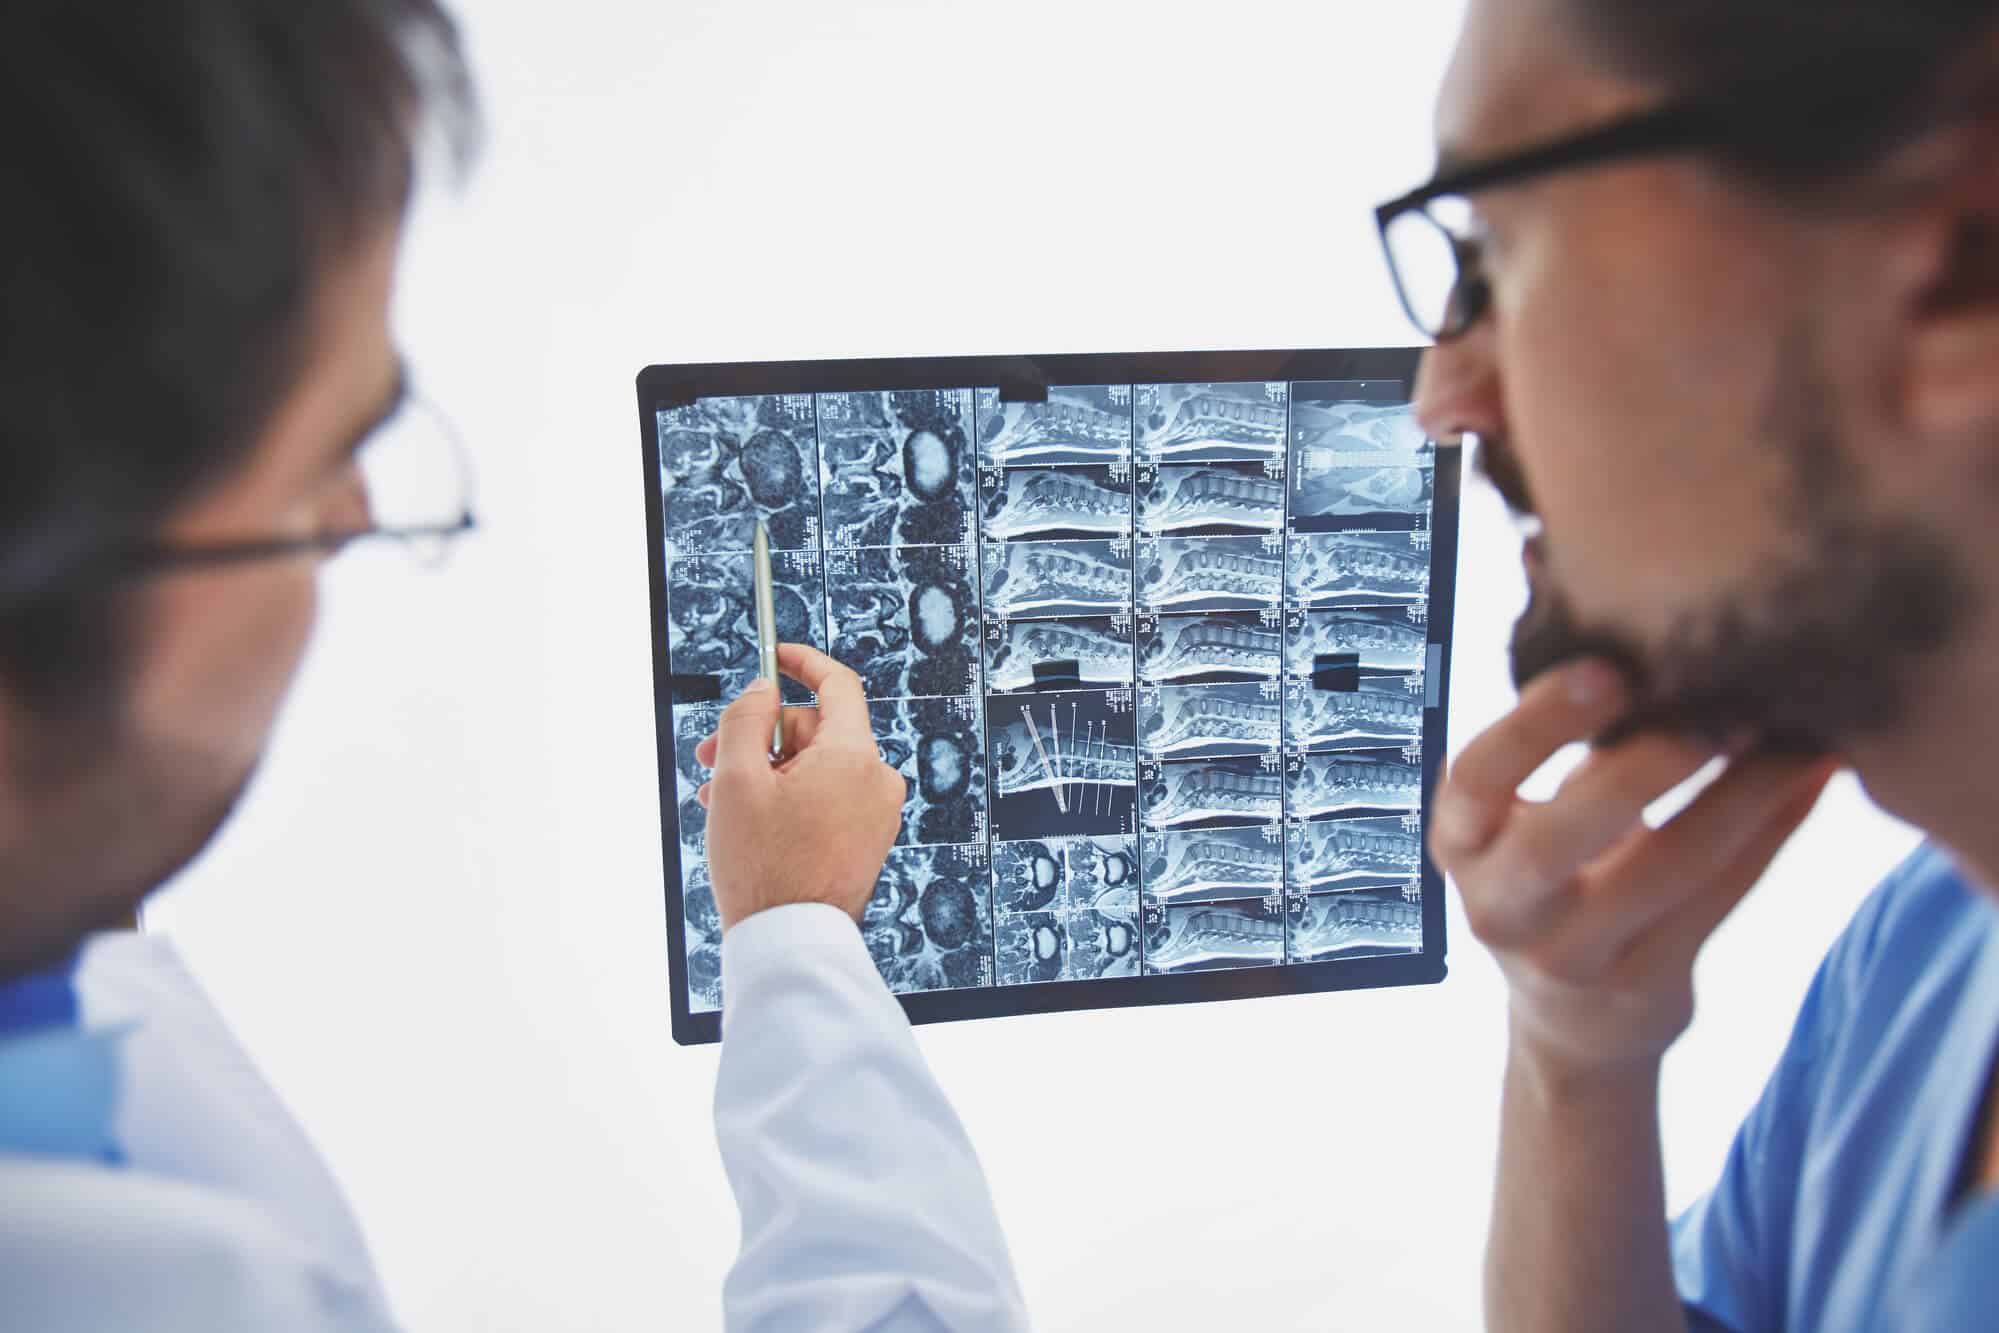 Radiologists looking at an x-ray